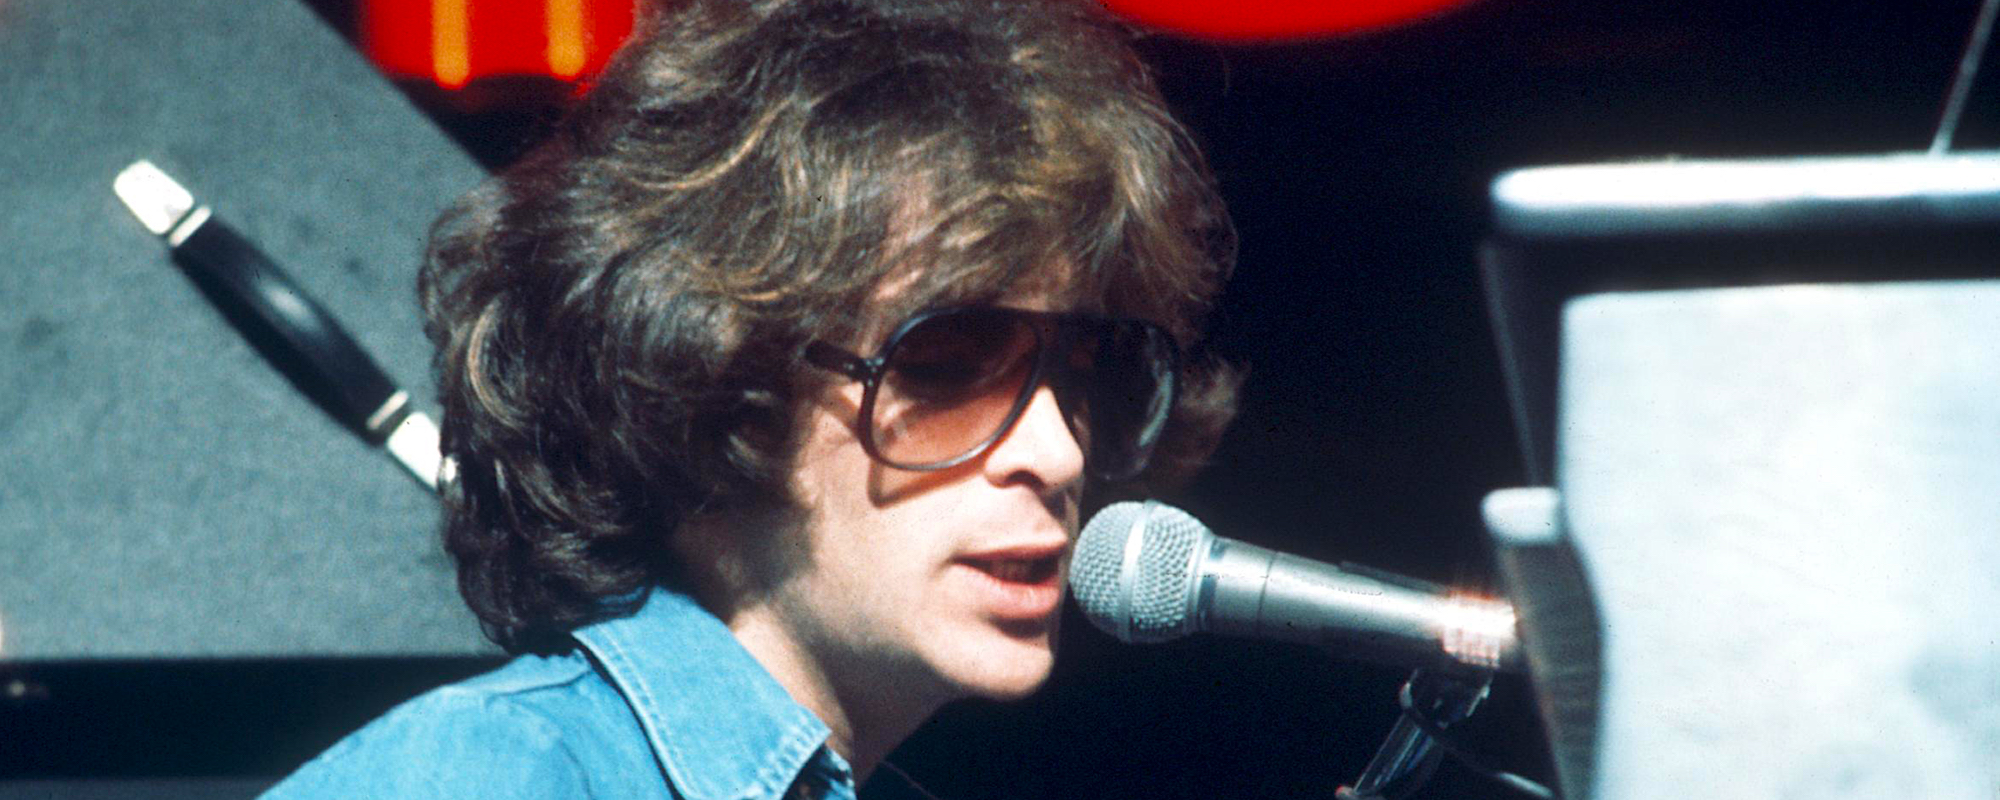 The “Miserable” Meaning Behind Eric Carmen’s 1975 Ballad “All By Myself”